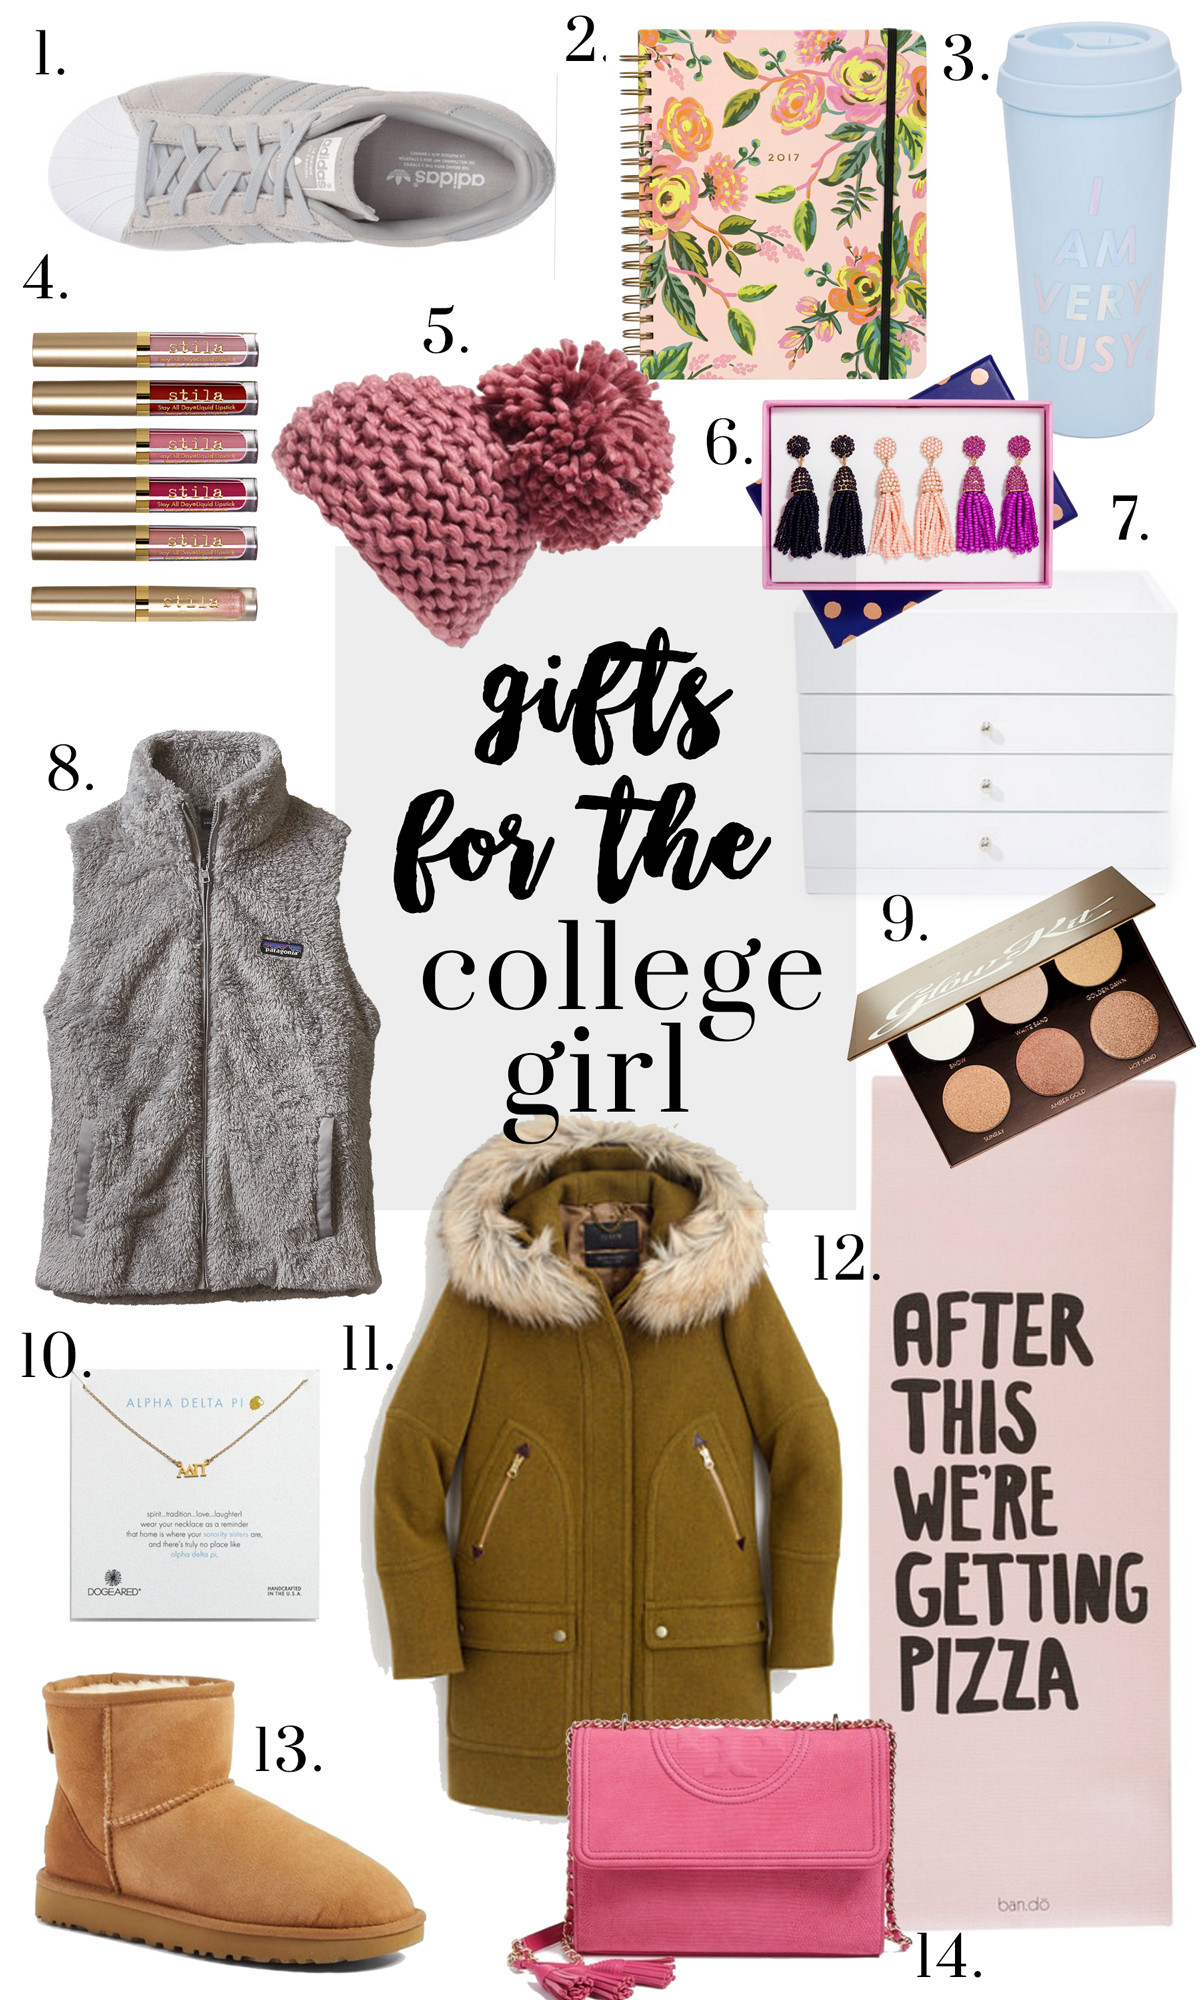 College Student Christmas Gift Ideas
 Top 20 Christmas Gift Ideas for College Girl Home